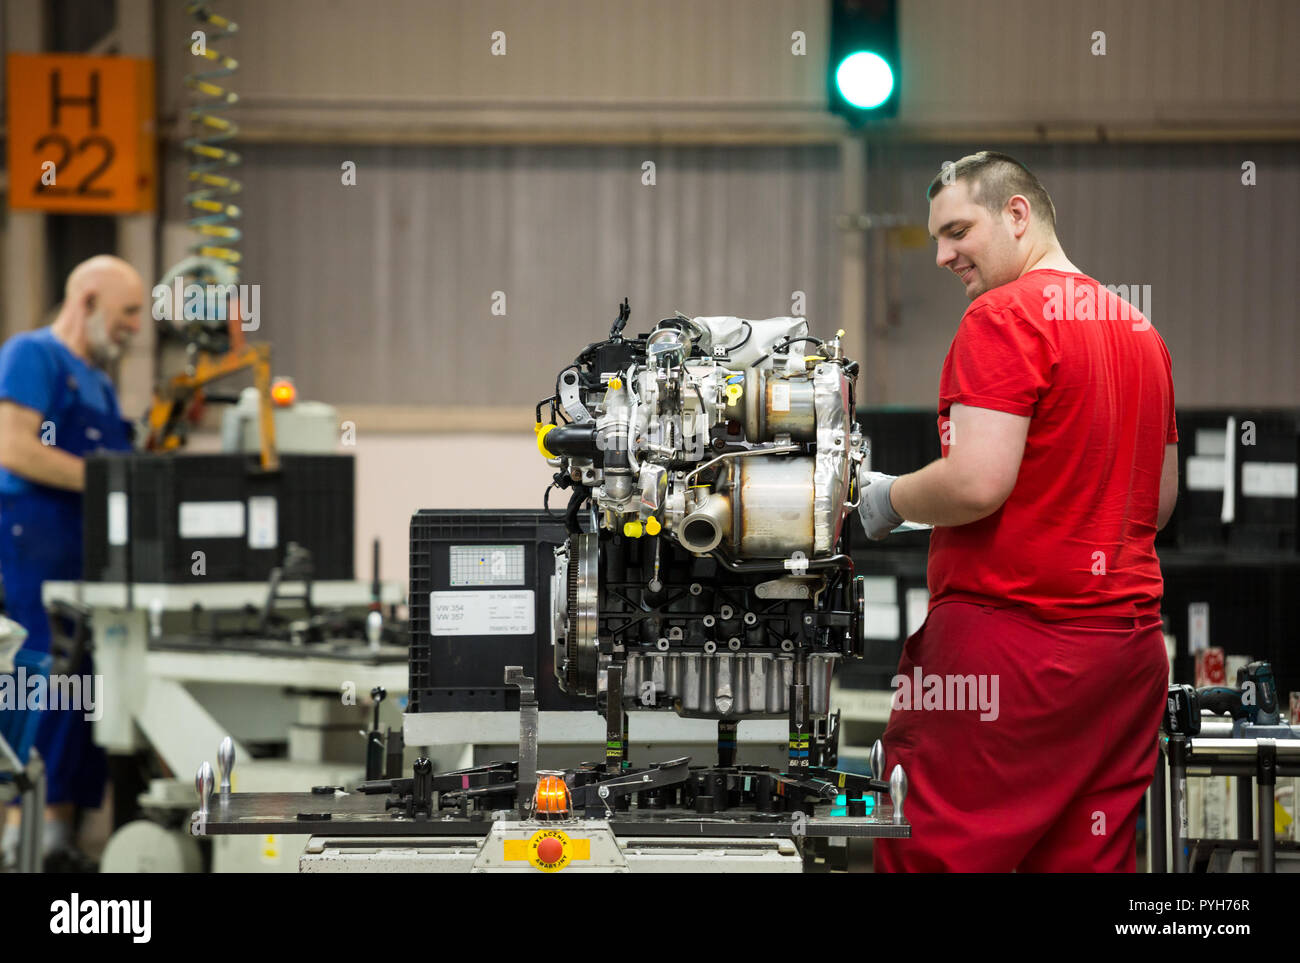 Poland, assembly at Volkswagen Poznan (VW commercial vehicles, Caddy and T6), pre-assembly work on engine blocks Stock Photo